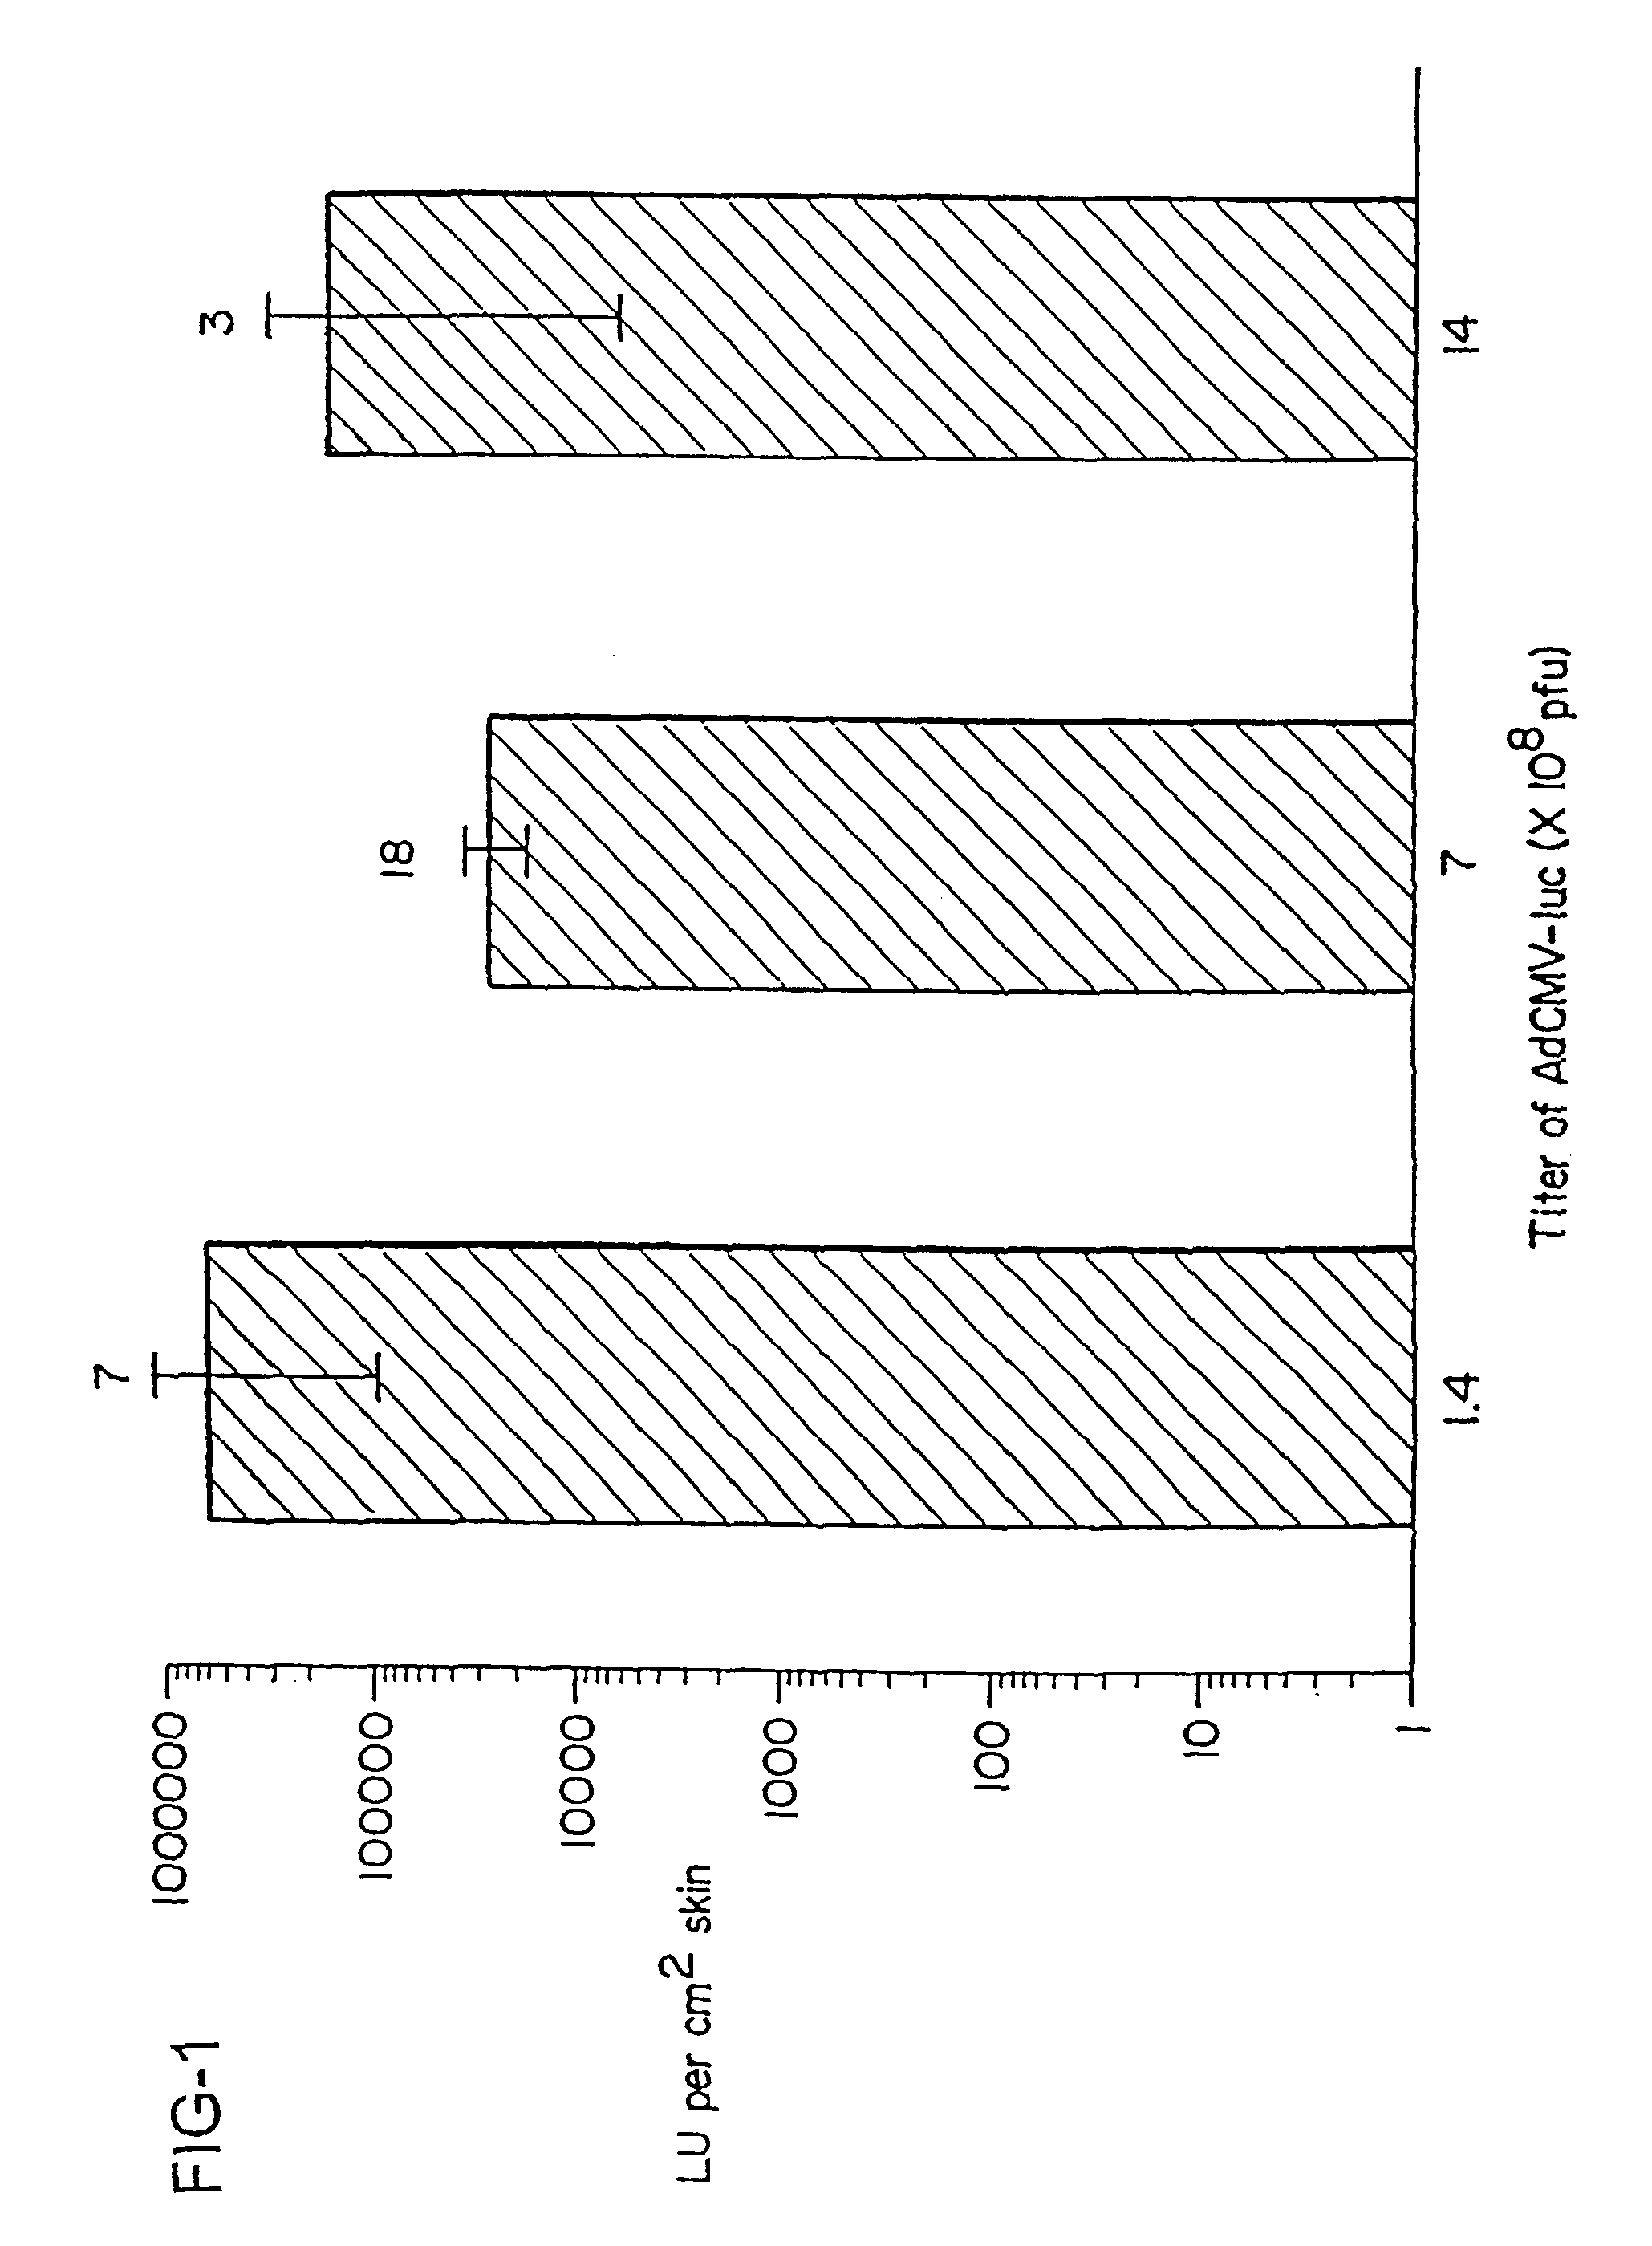 Noninvasive genetic immunization, expression products therefrom and uses thereof